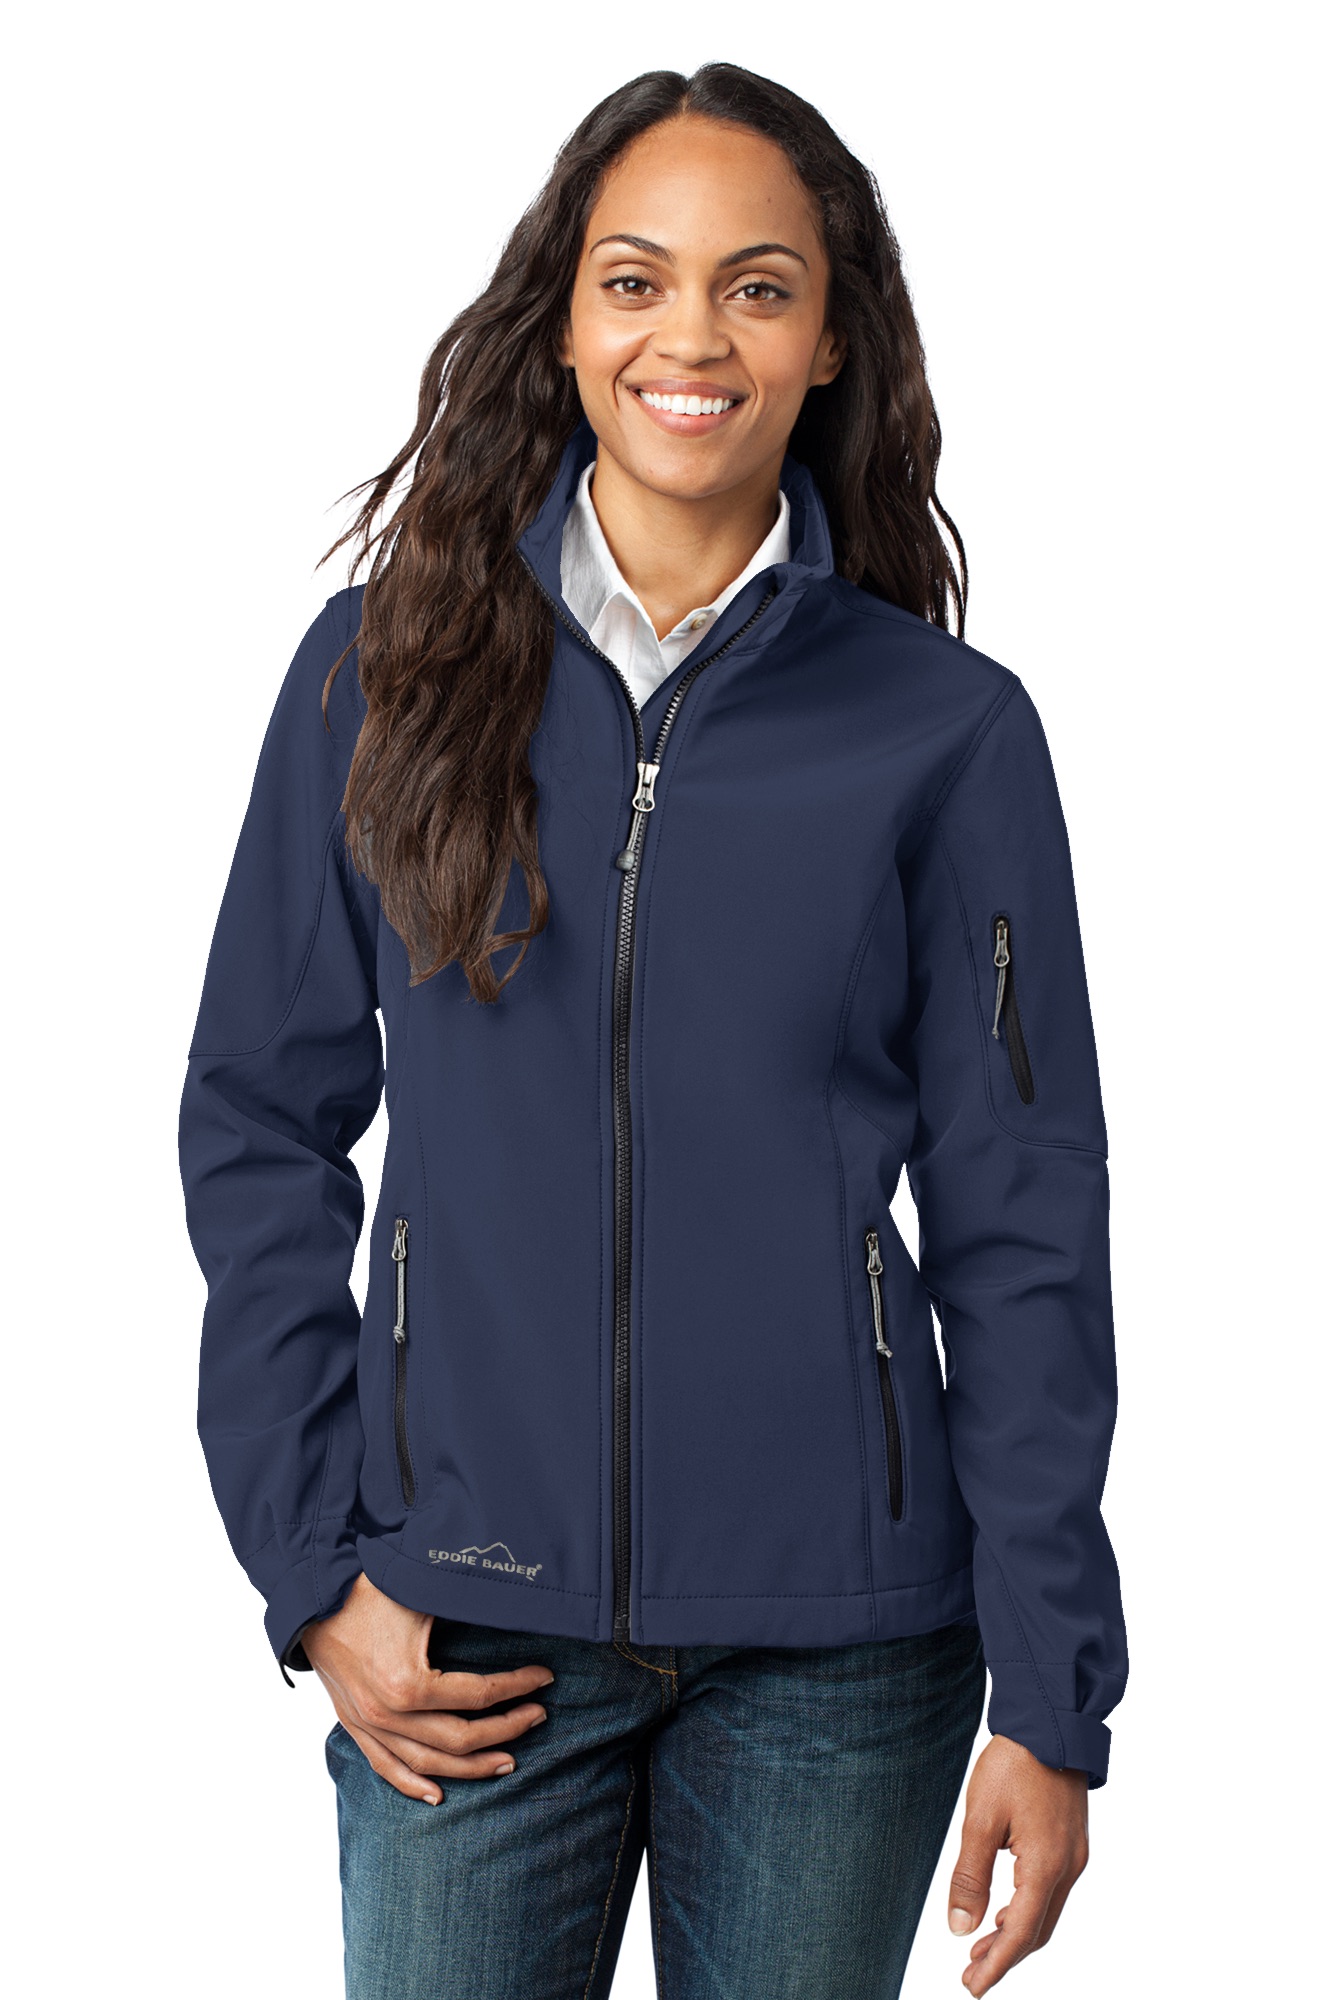 Eddie Bauer Ladies Insulated Jacket with Embroidery